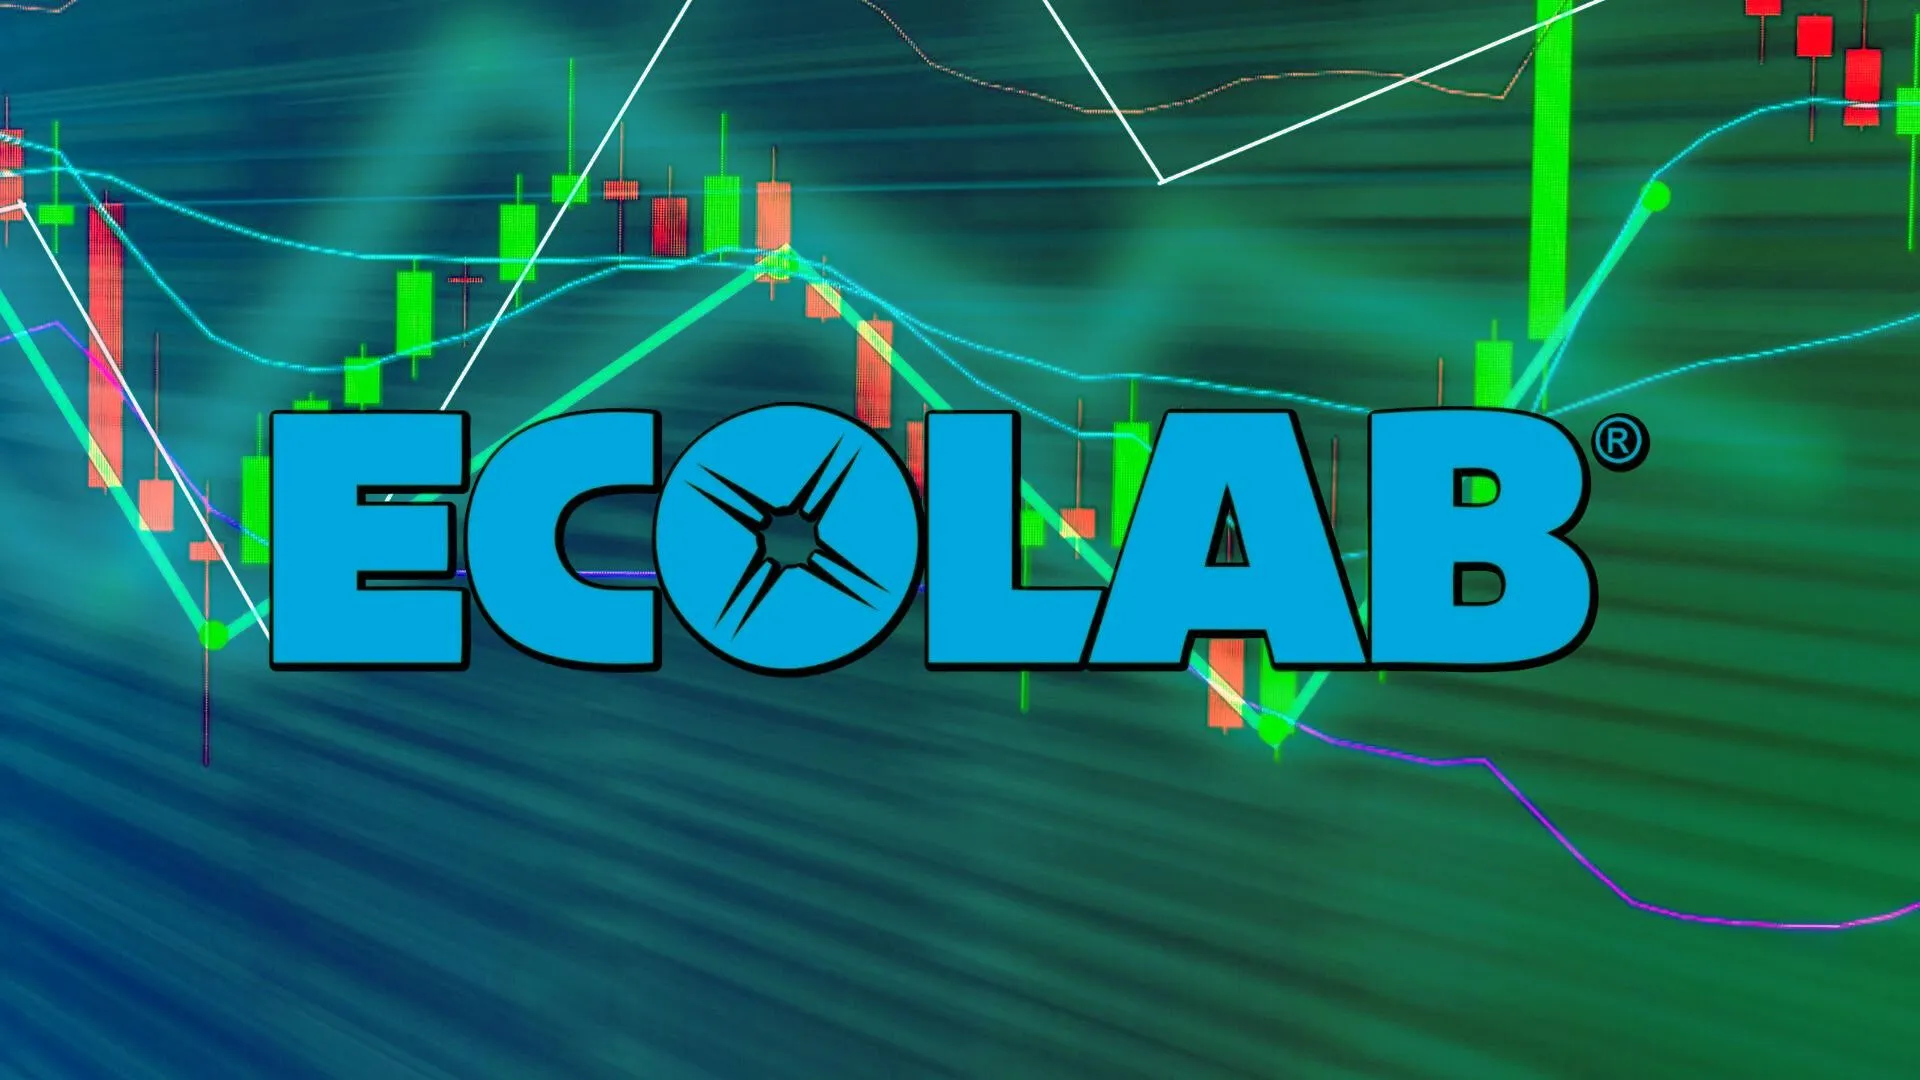 Ecolab Inc. Price Prediction: Could ECL Stock Price Fall Soon?